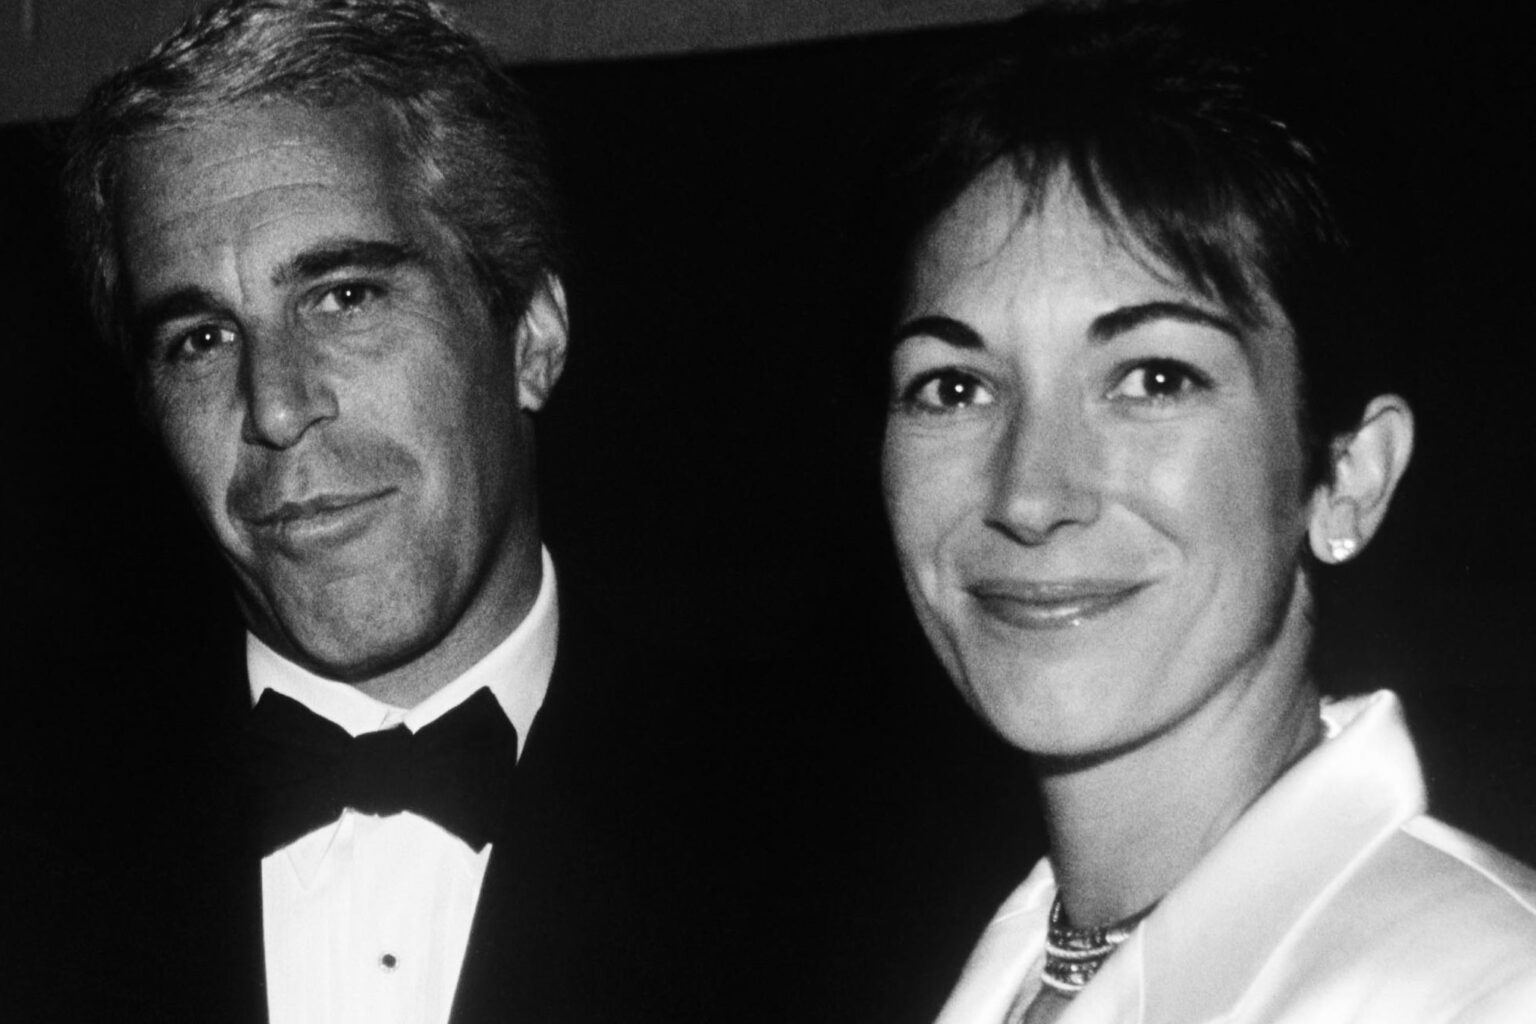 Ghislaine Maxwell is set to face trial in July 2021. Here are some of her most recent lies from Jeffrey Epstein's deposition debunked.